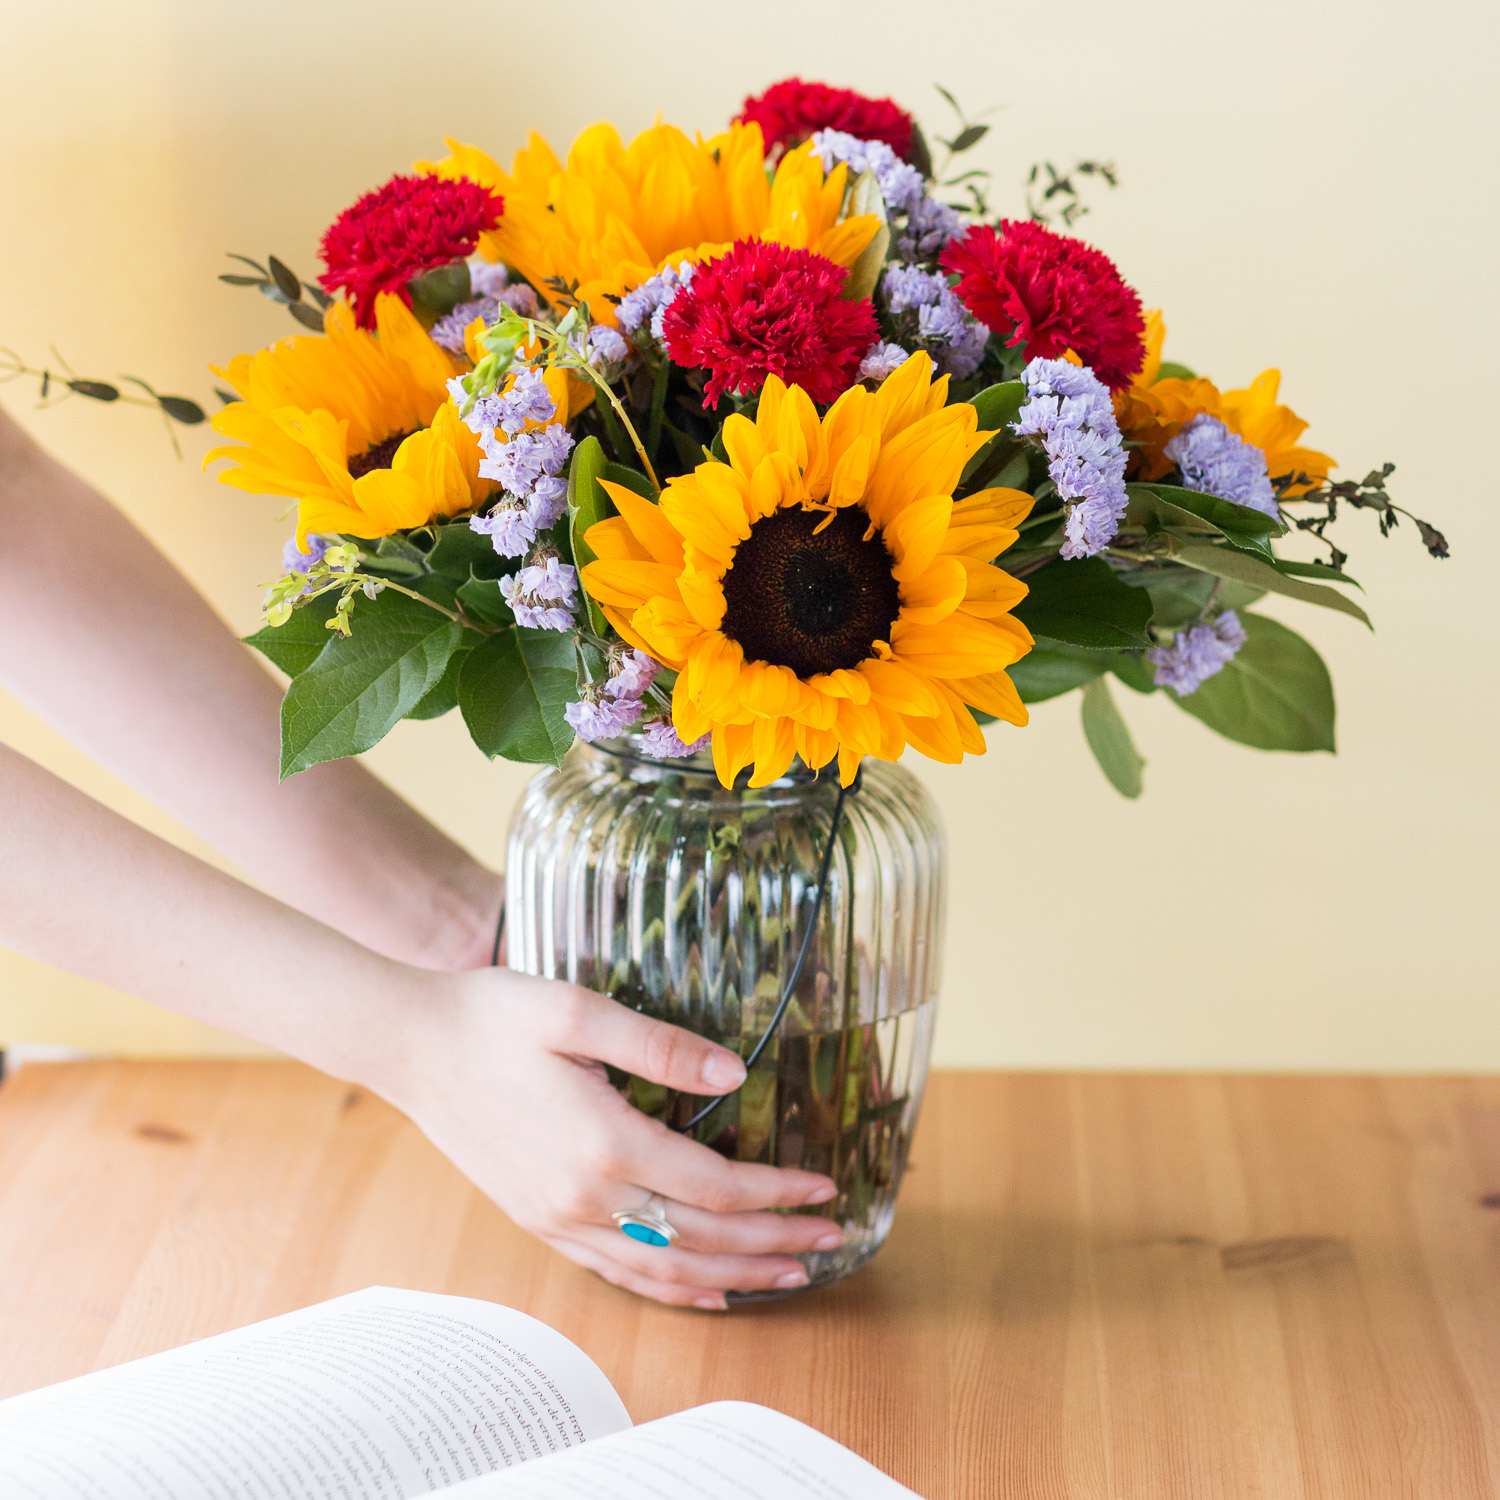 What Are The Perfect Flowers To Pair With Sunflowers